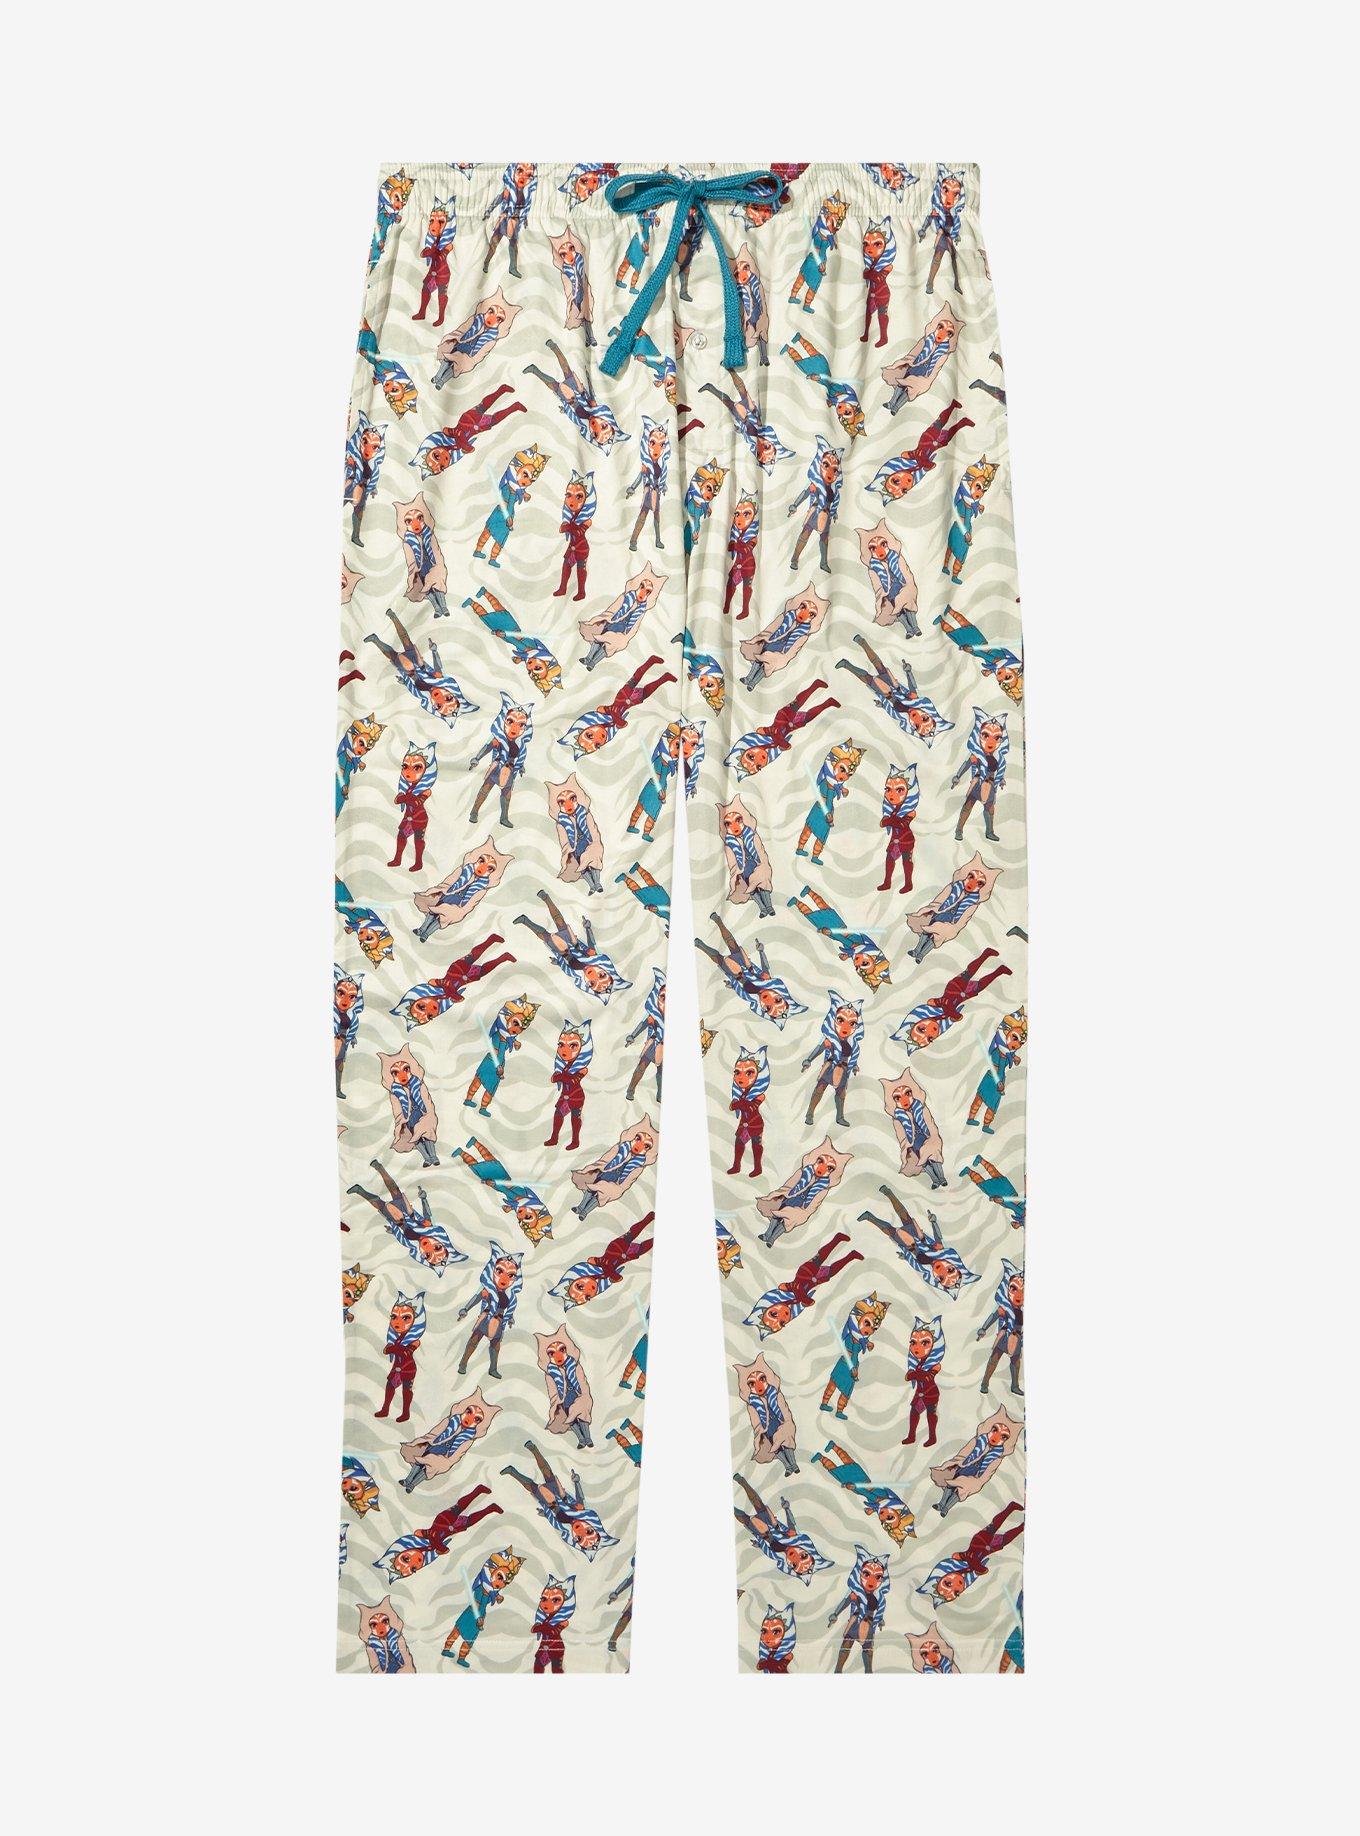 Strawberry Shortcake Icons Allover Print Sleep Pants - BoxLunch Exclusive